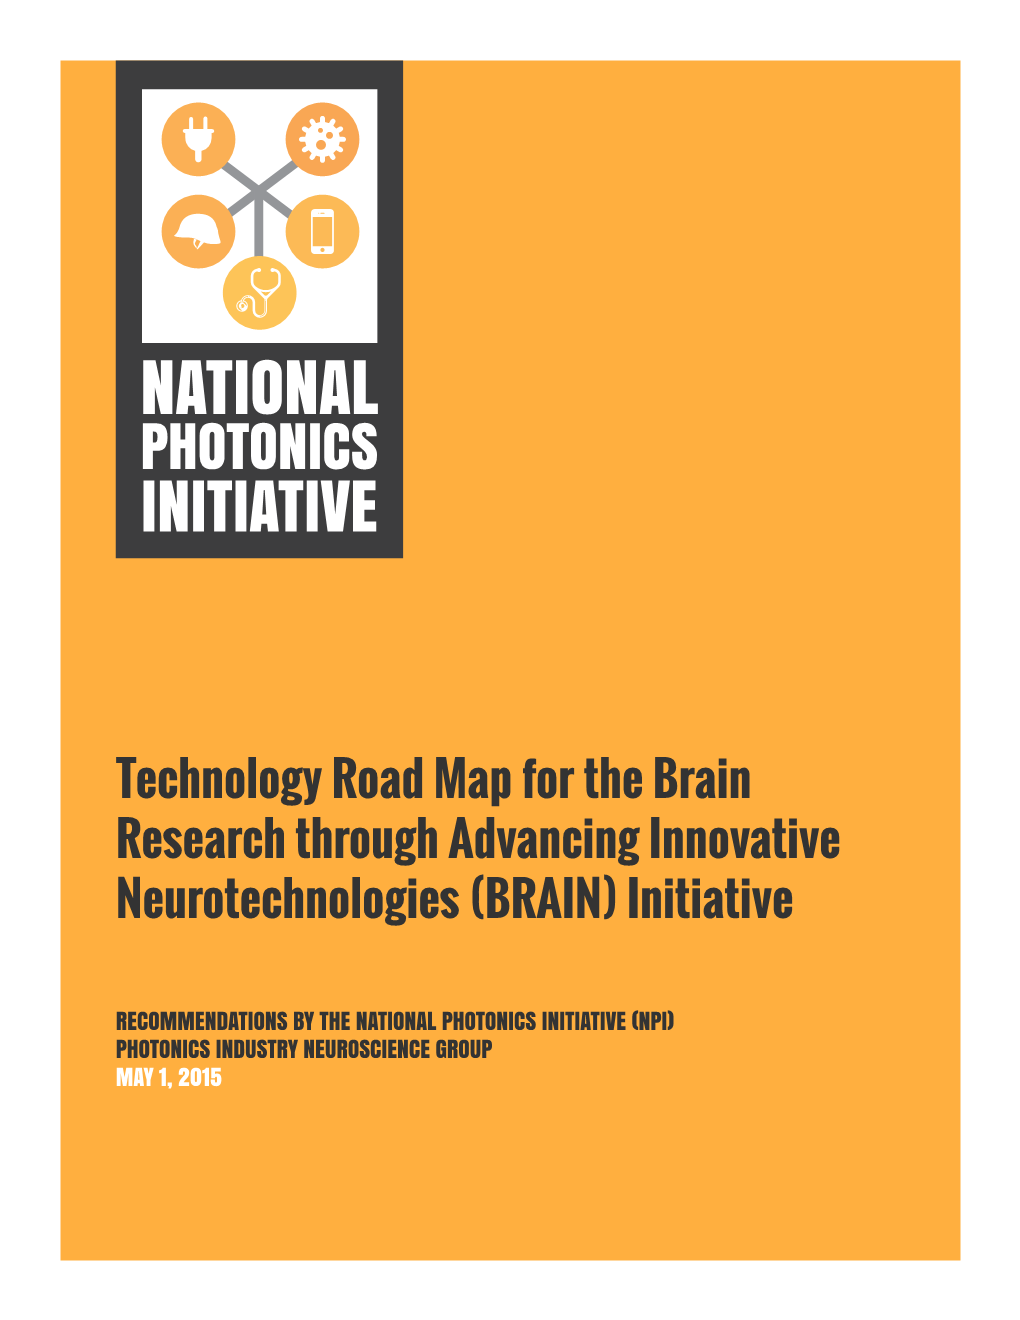 Technology Road Map for the Brain Research Through Advancing Innovative Neurotechnologies (BRAIN) Initiative